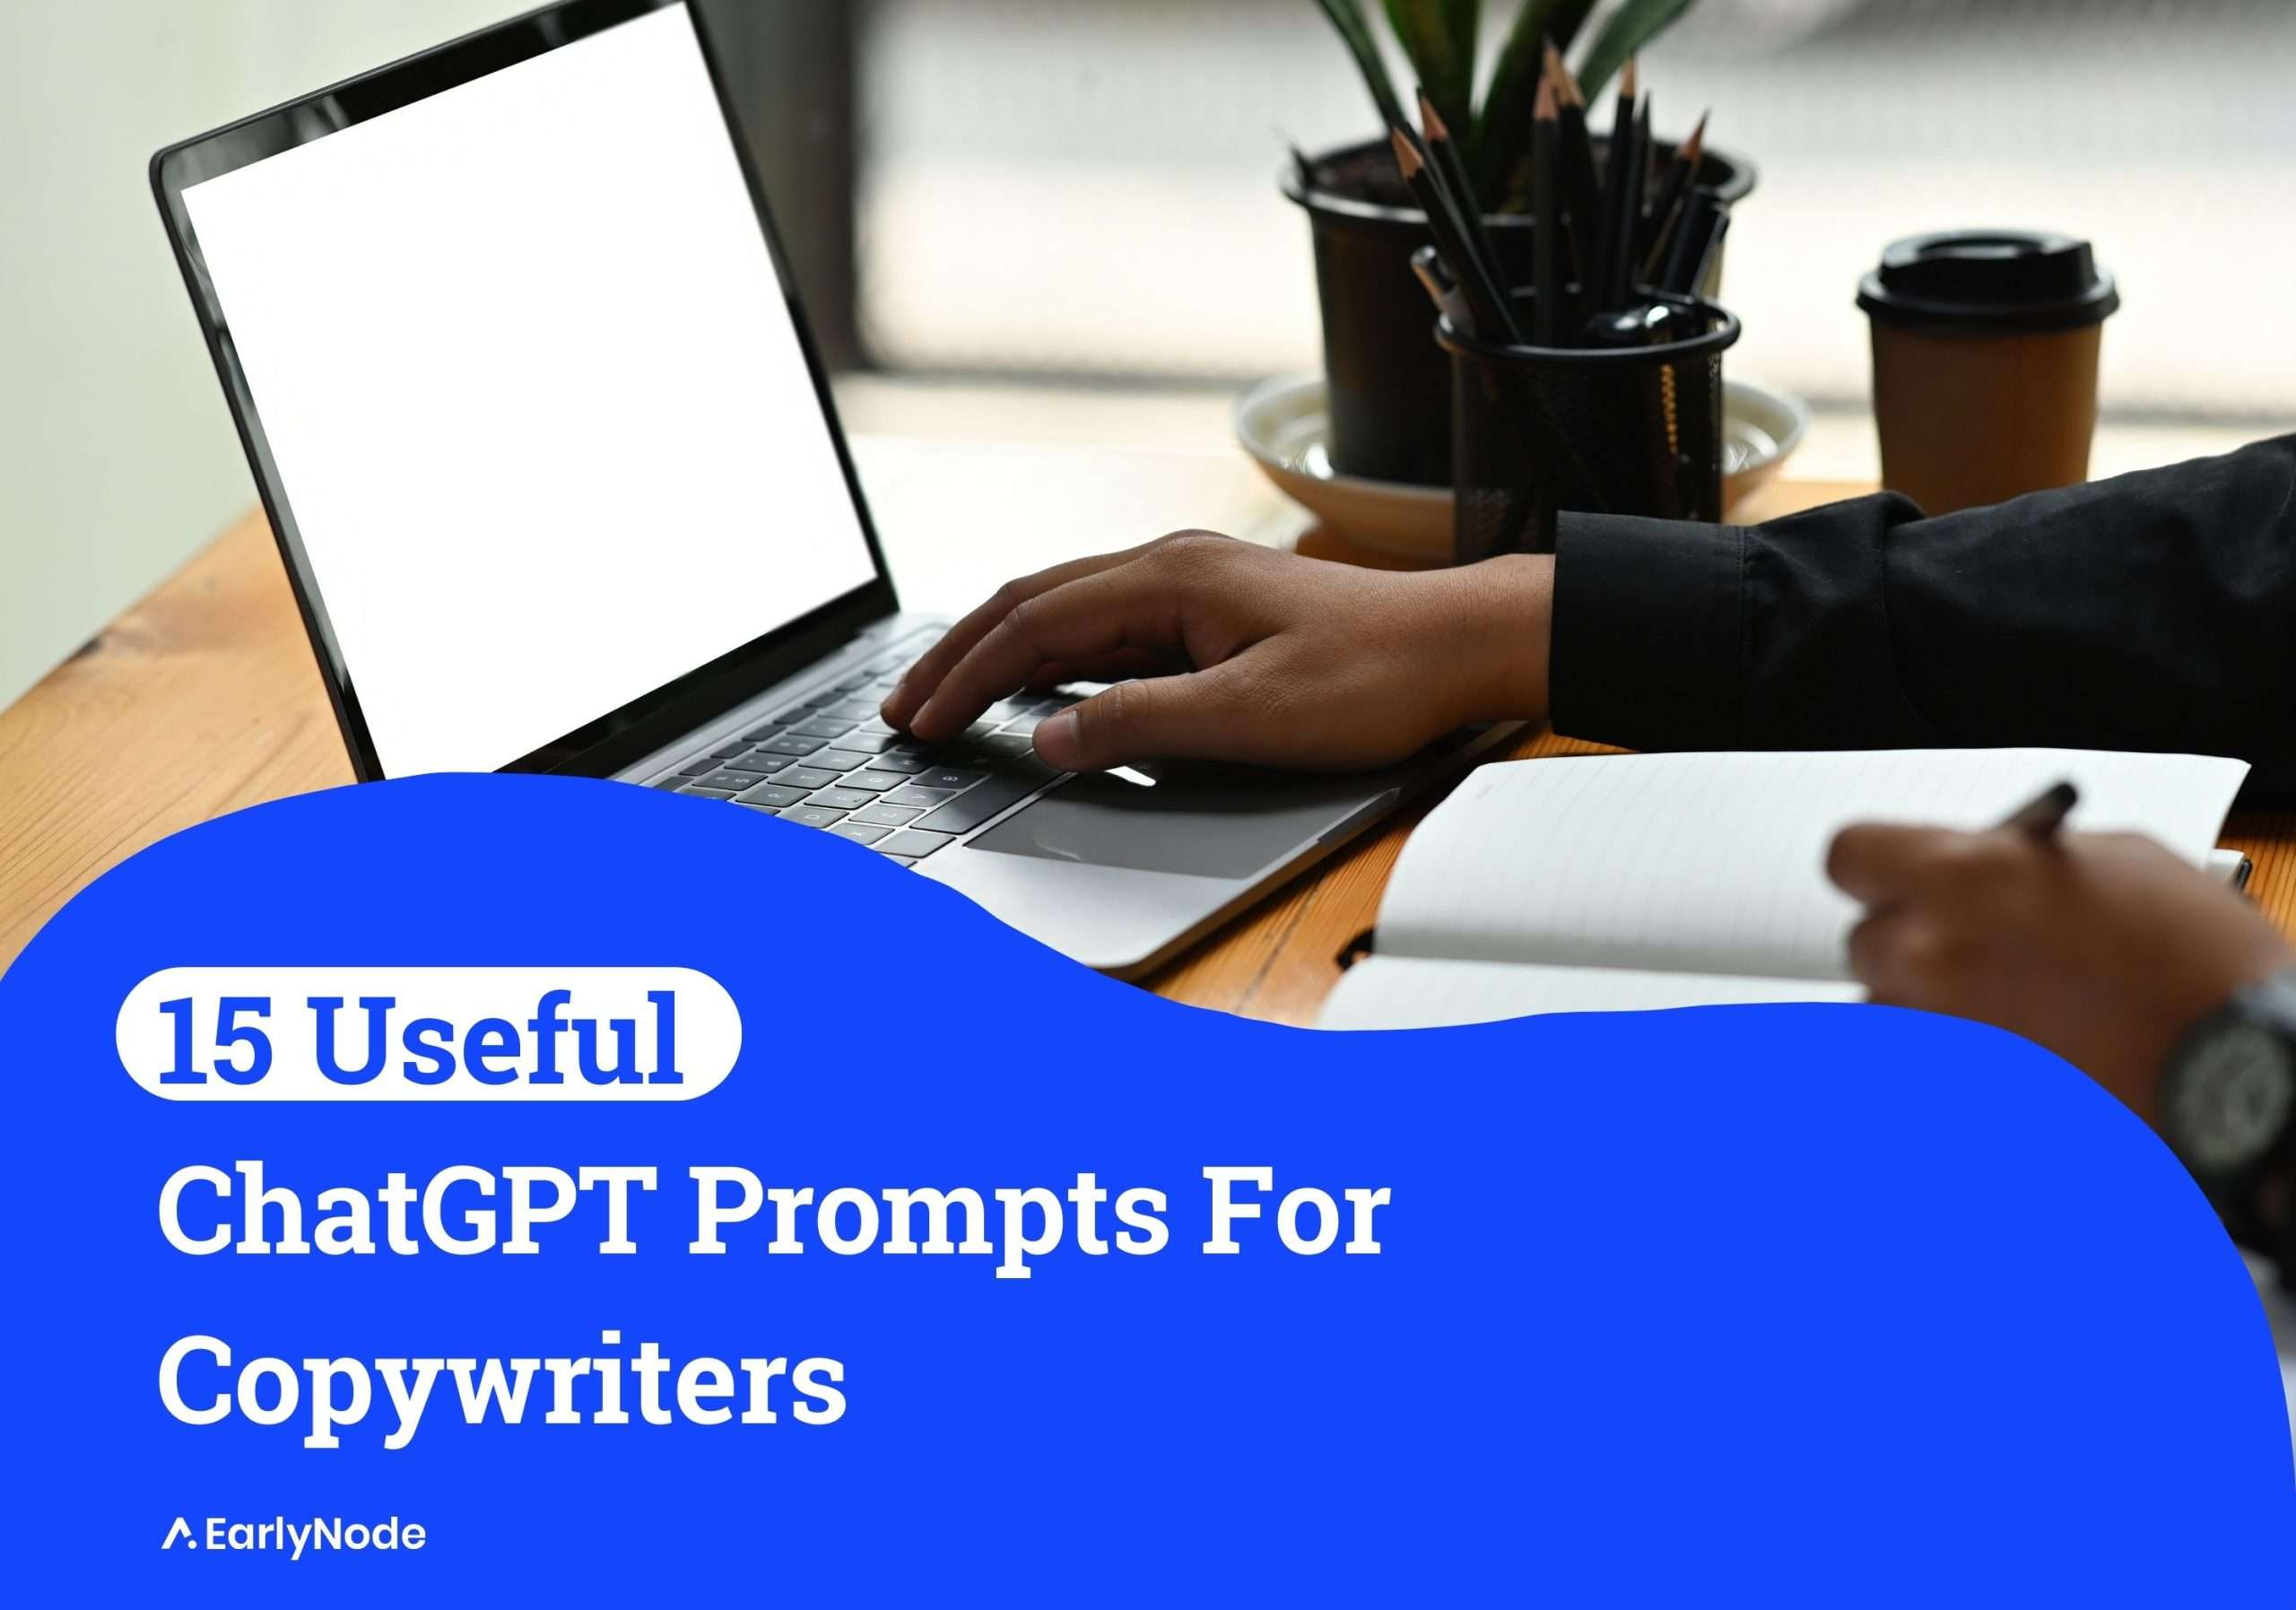 15 Tailored ChatGPT Prompts for Copywriters